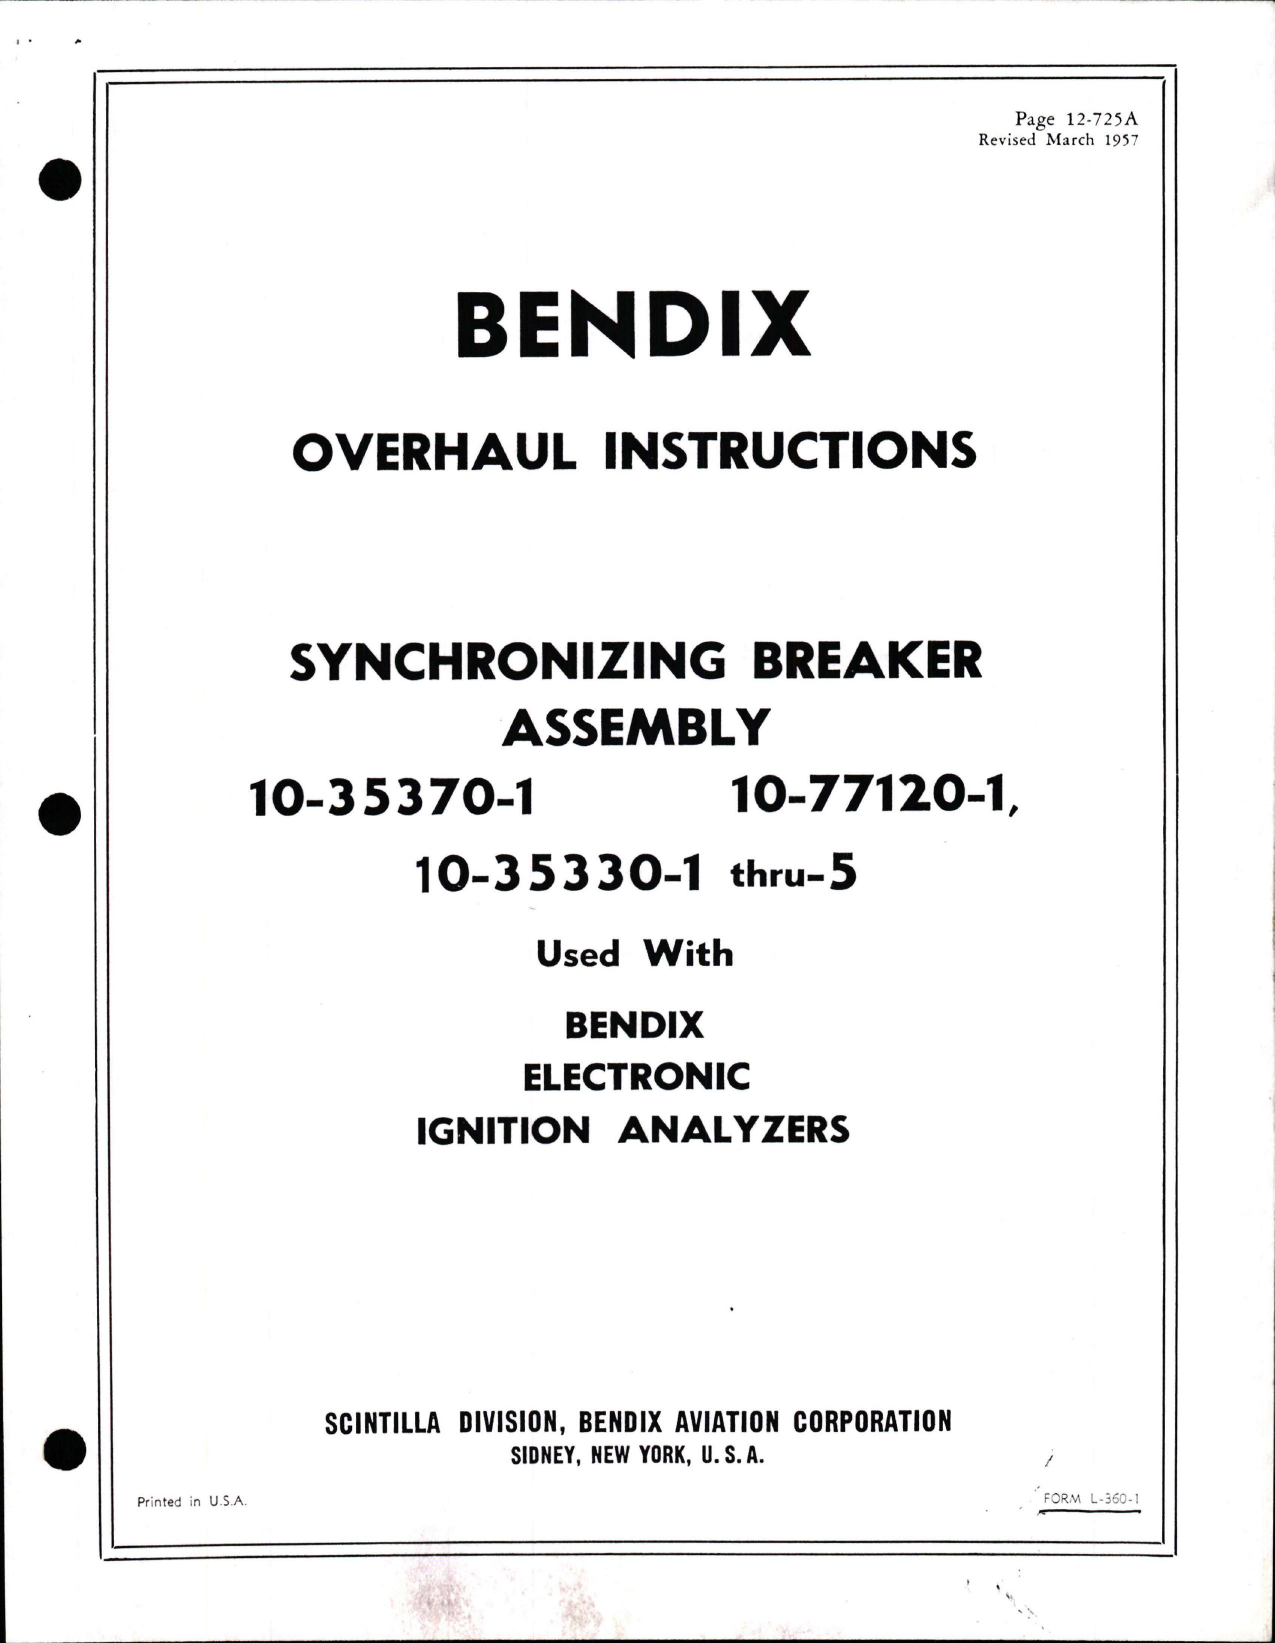 Sample page 1 from AirCorps Library document: Overhaul Instructions for Synchronizing Breaker Assembly - 10-35370-1, 10-77120-1, and 10-35330-1 thru -5